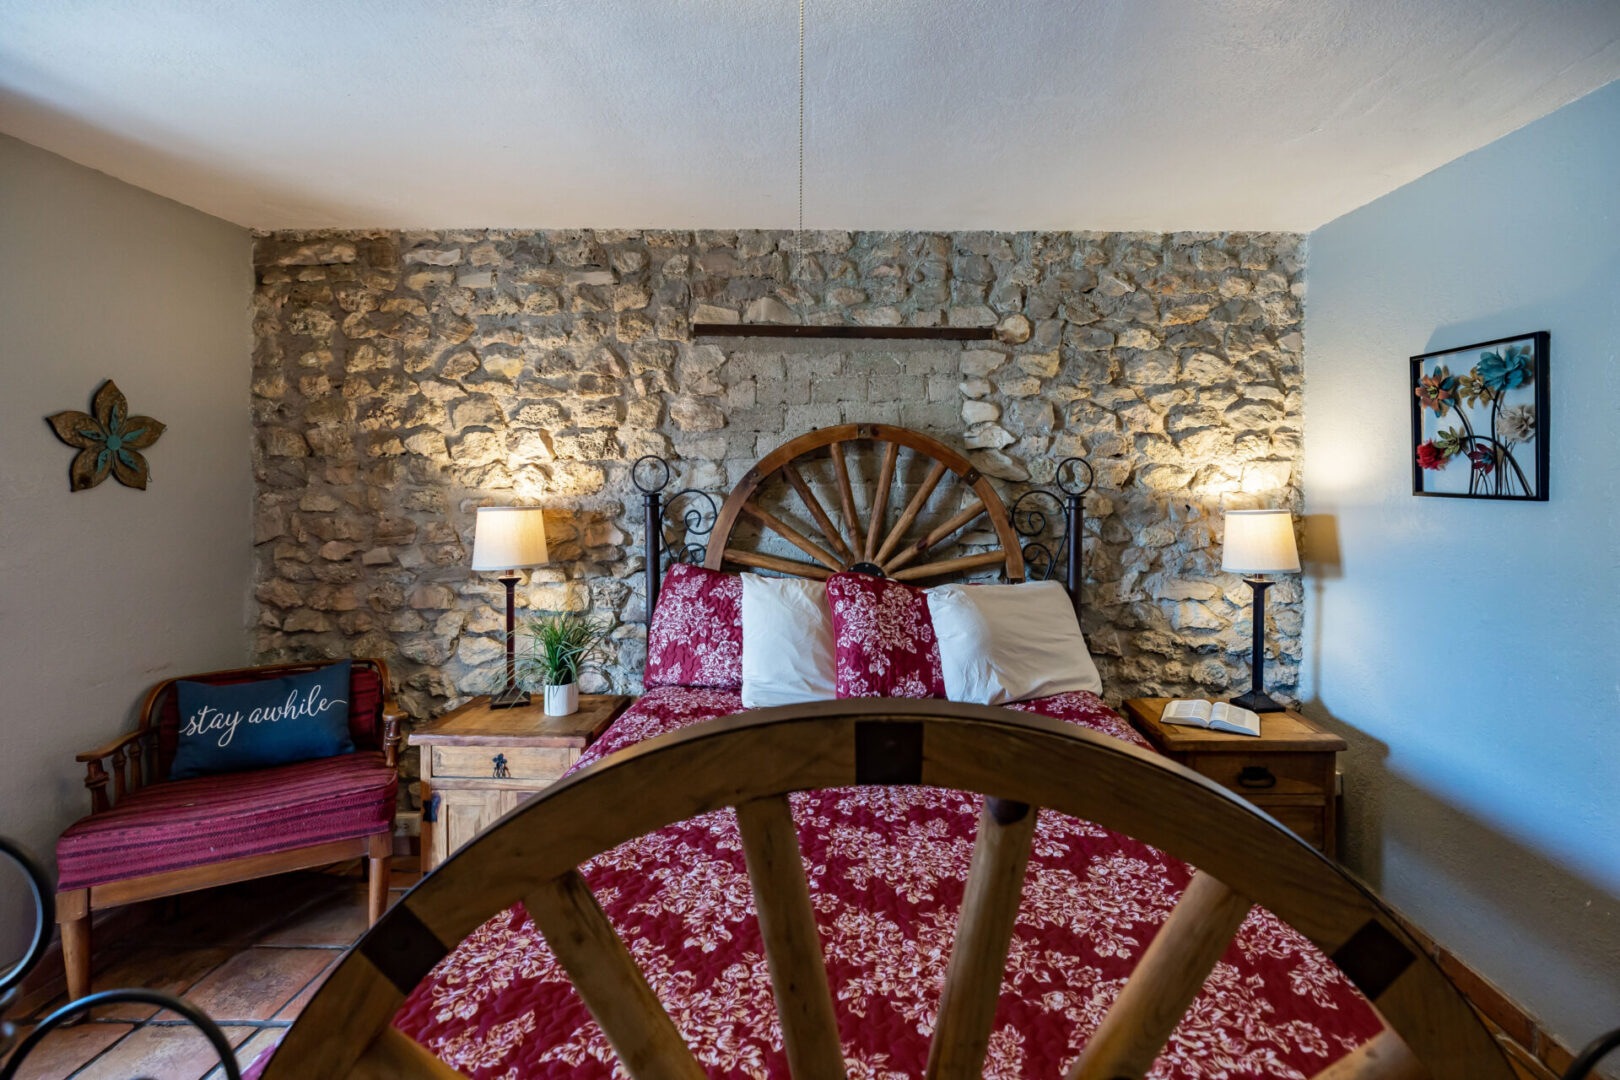 A room with a stone wall design and a bed with pink sheets.